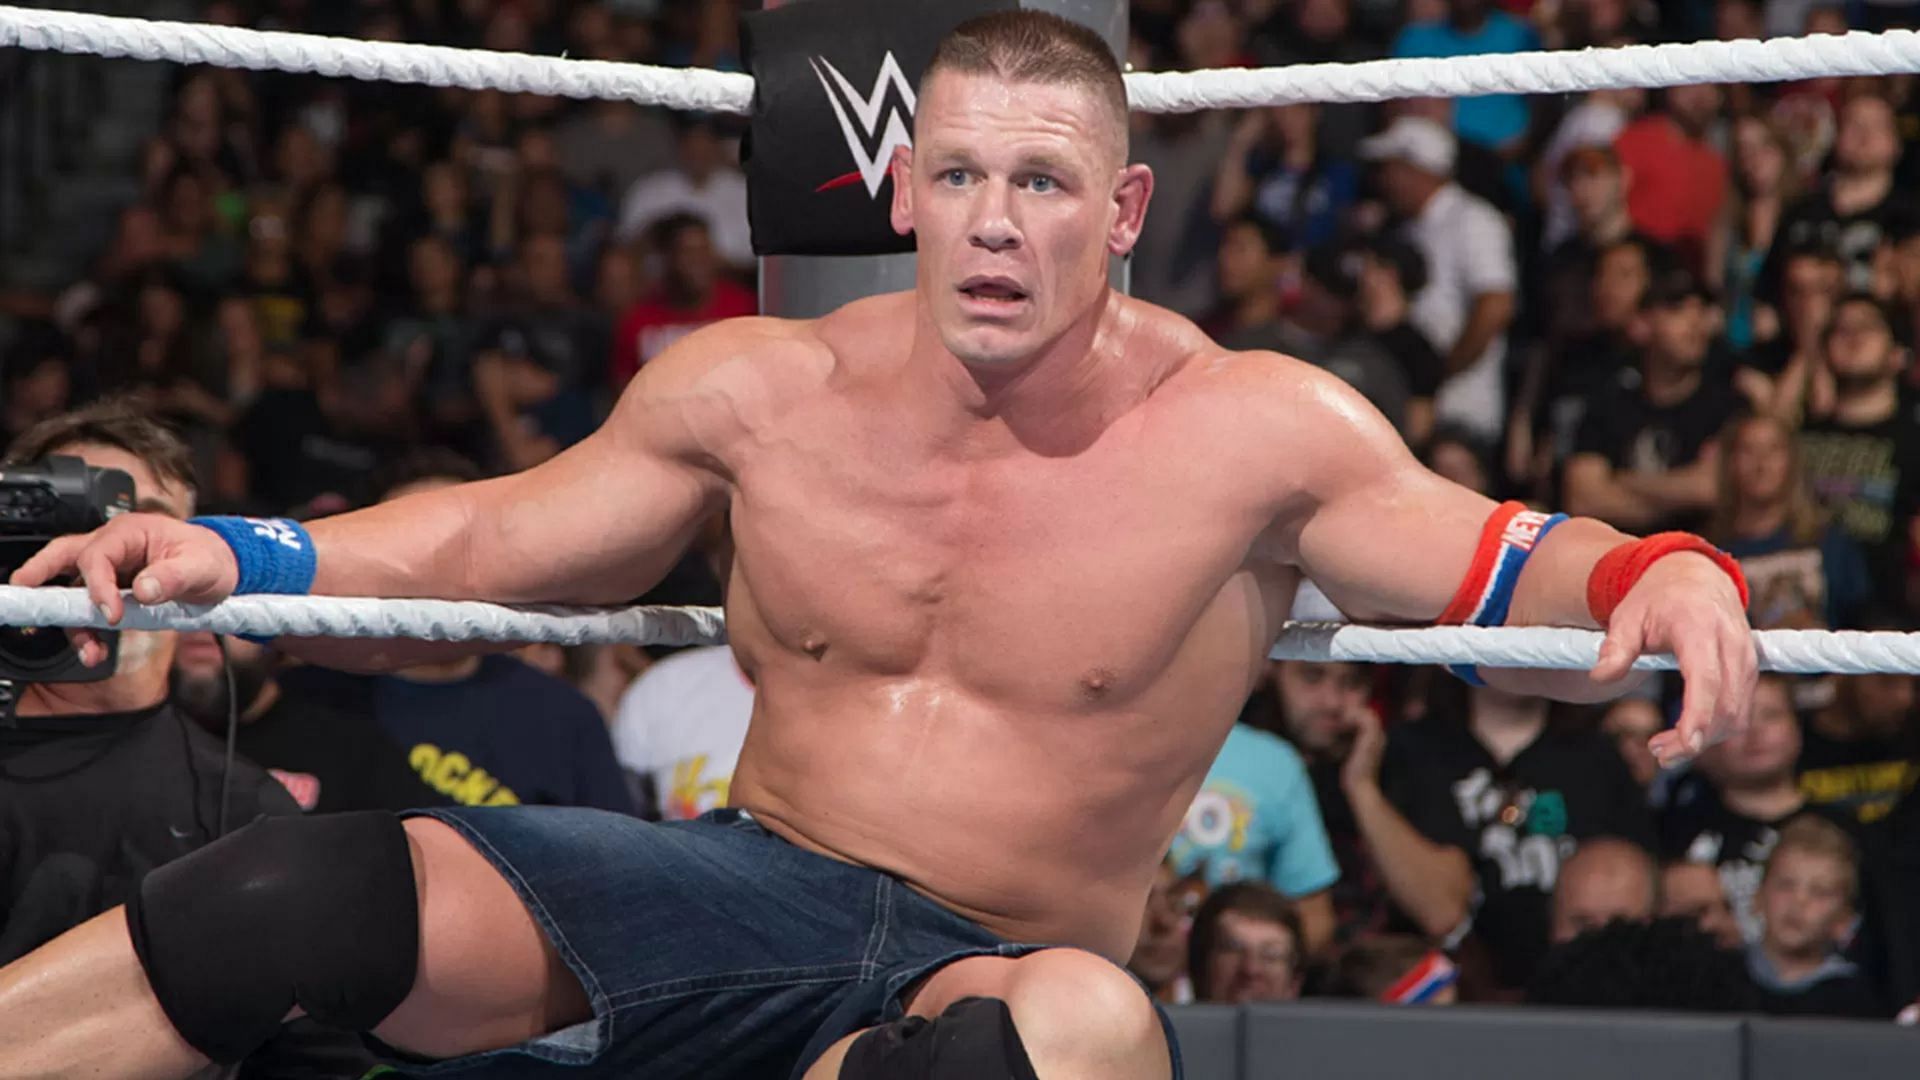 John Cena spent about a decade and a half as a regular competitor in WWE